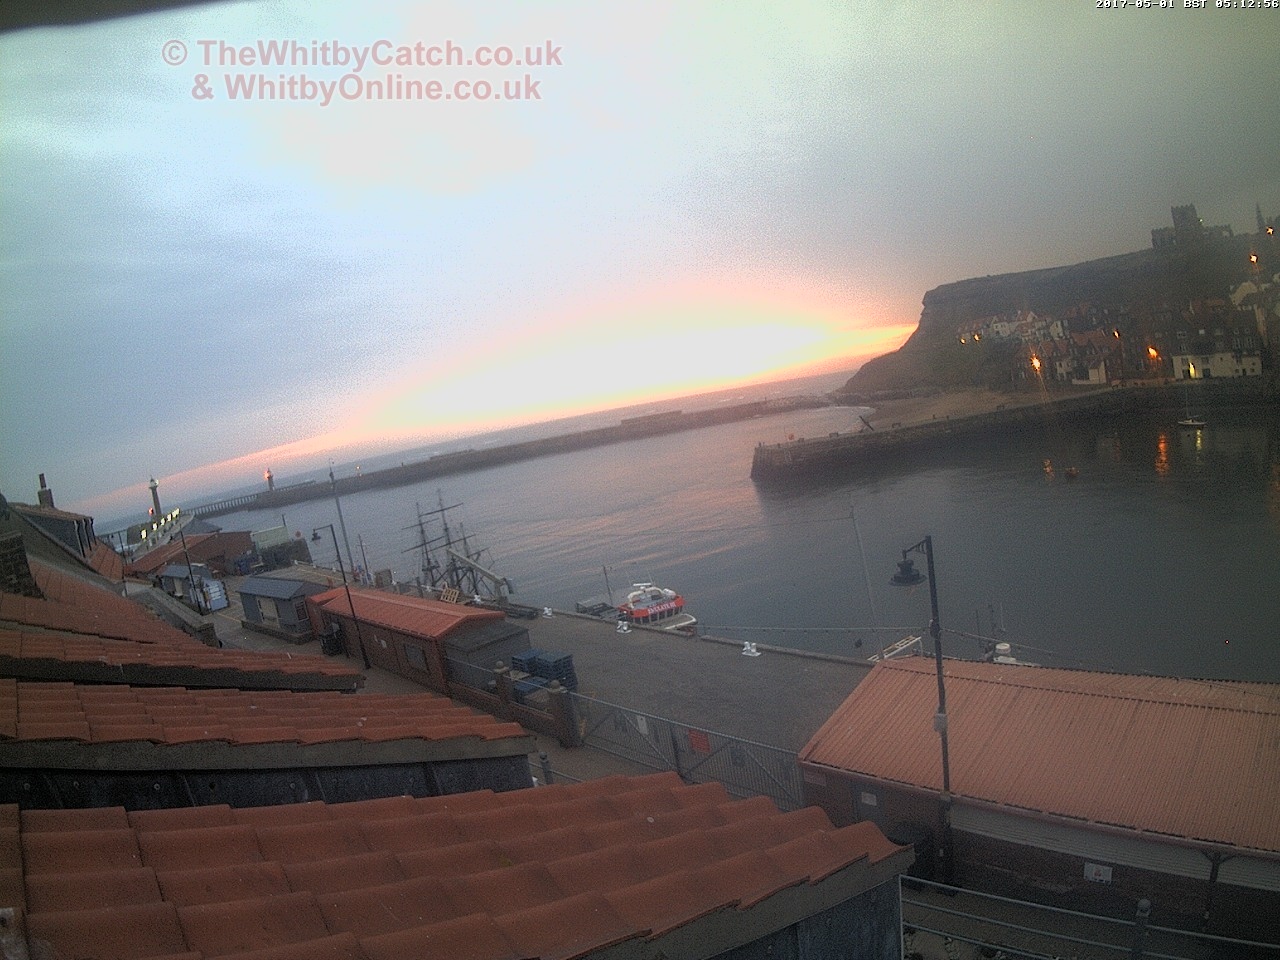 Whitby Mon 1st May 2017 05:13.